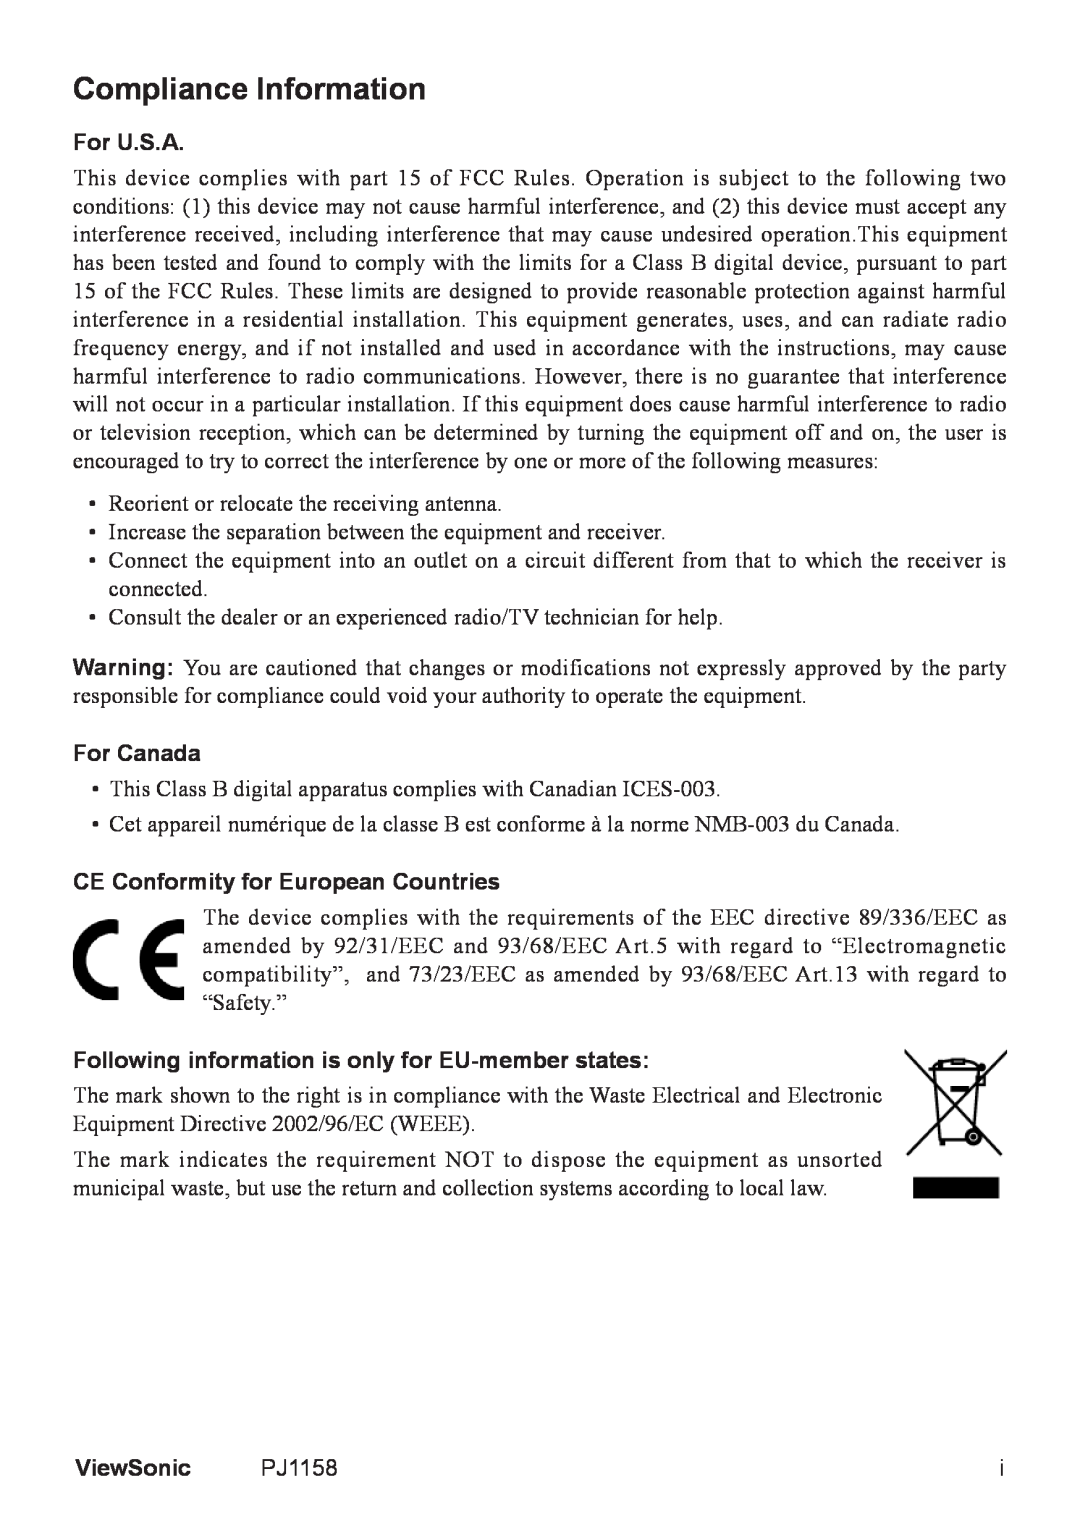 ViewSonic PJ1158 manual Compliance Information, For U.S.A, For Canada, CE Conformity for European Countries, ViewSonic 